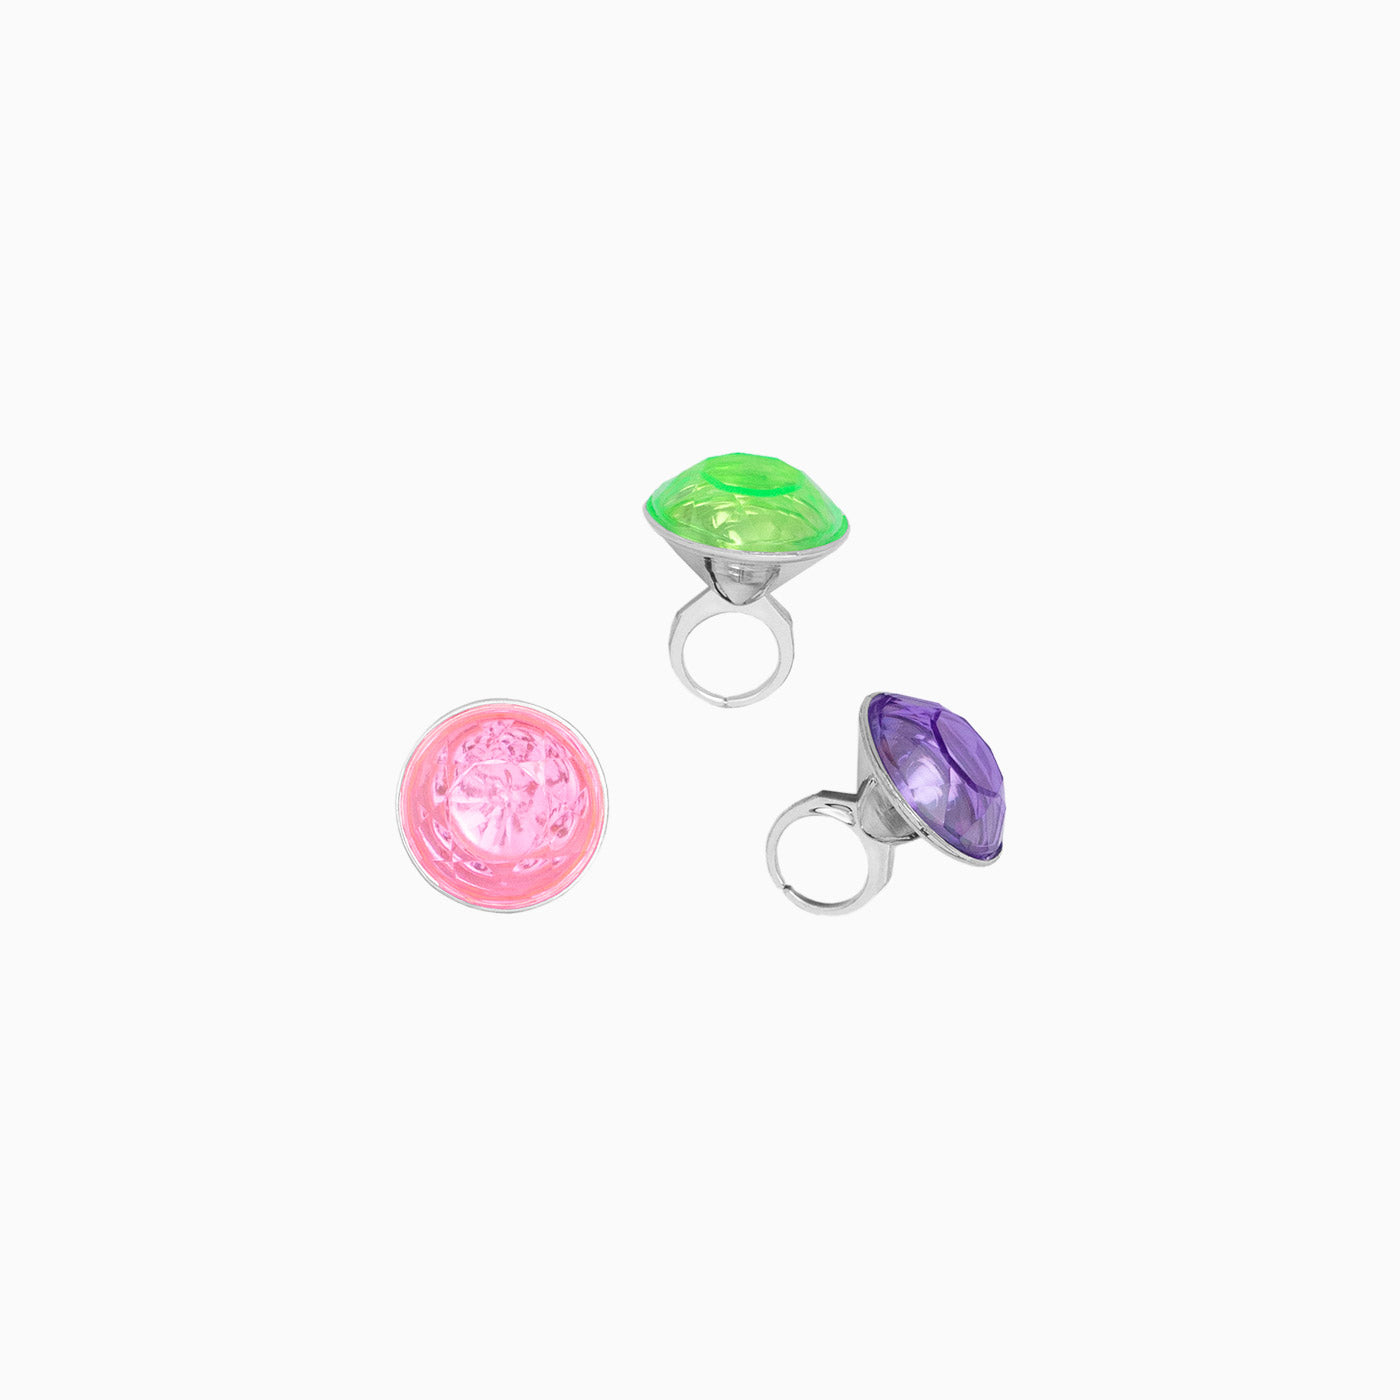 Ring toy with diamond for piñata